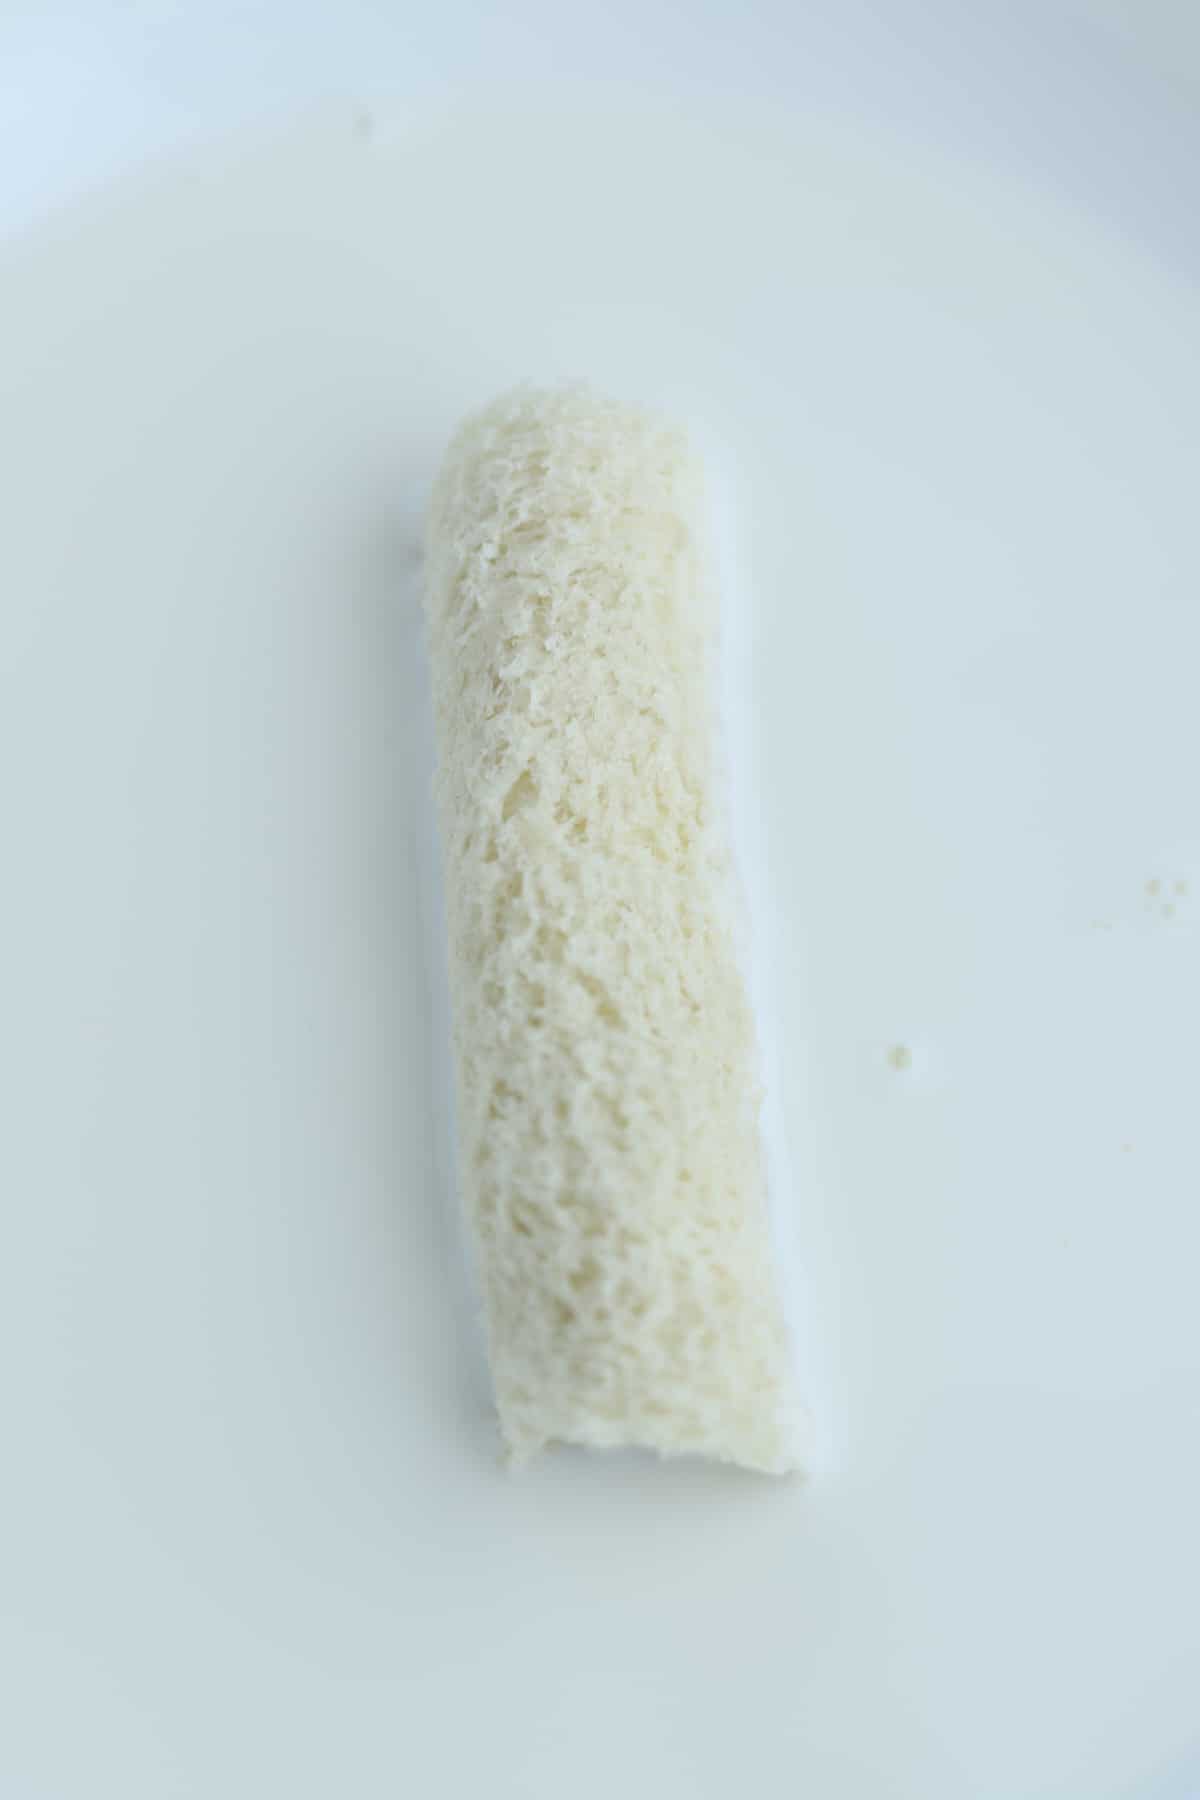 a rolled up piece of bread in a milk mixture